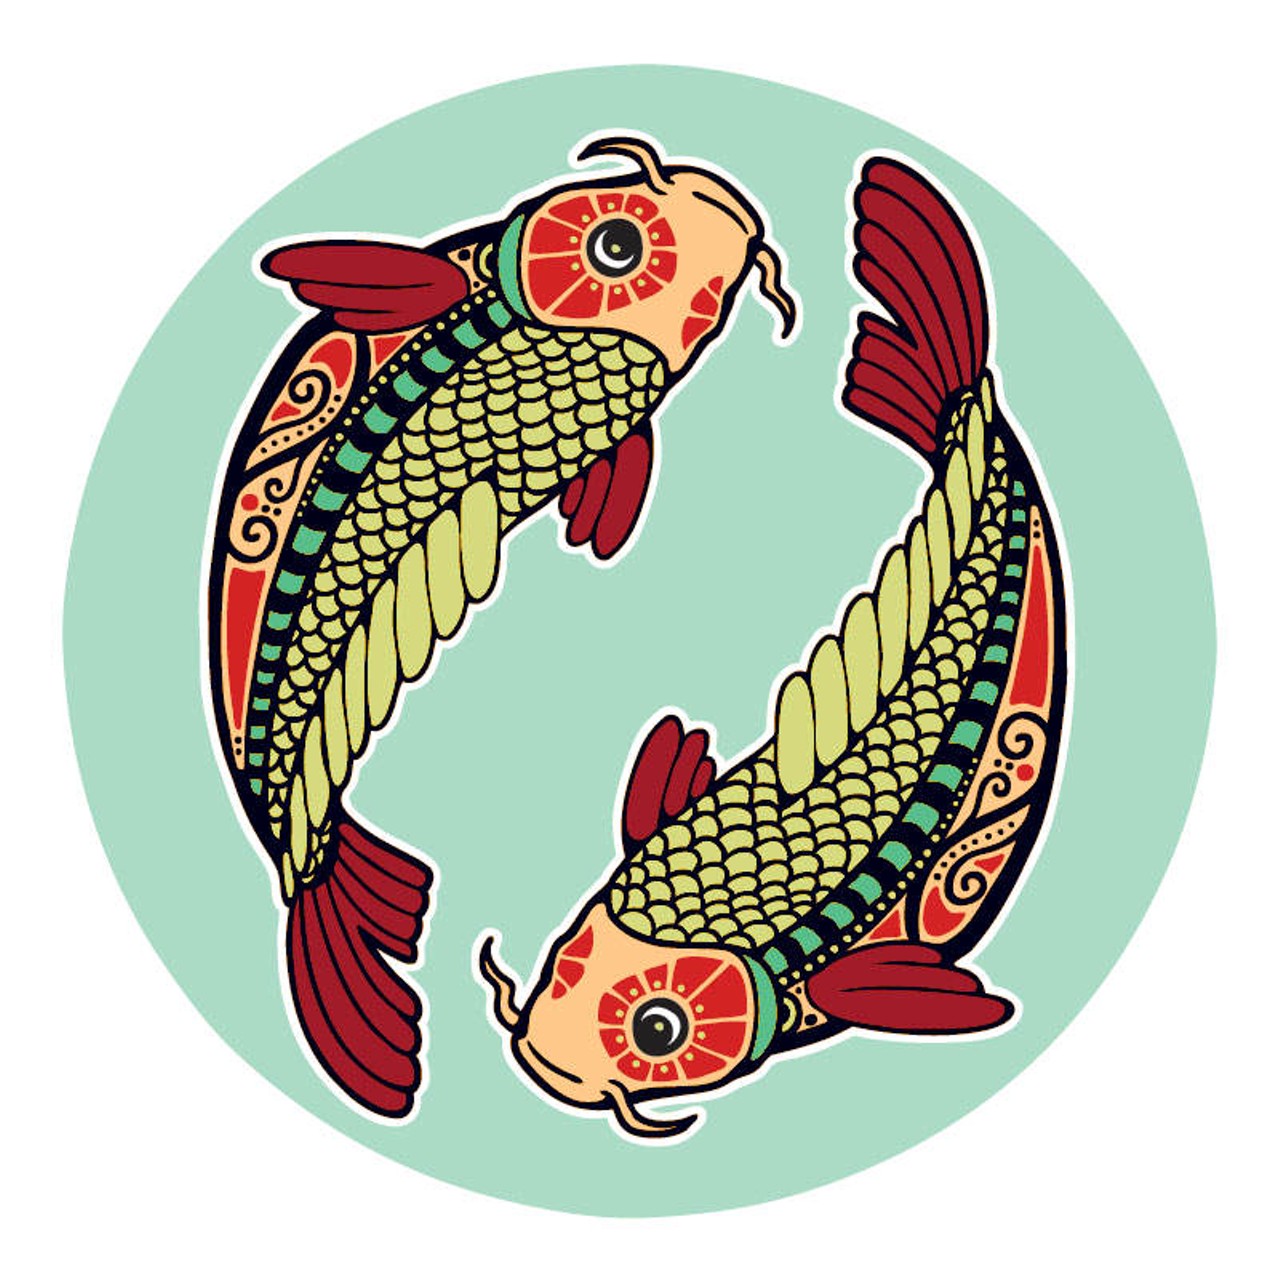 PISCES (Feb. 21-March 20): 
You can&#146;t believe you&#146;re doing this. We surprise ourselves when we step out of line. But who&#146;s to say where the lines are? Only you know what&#146;s right for you. If you&#146;re OK with this, go ahead and go for it.